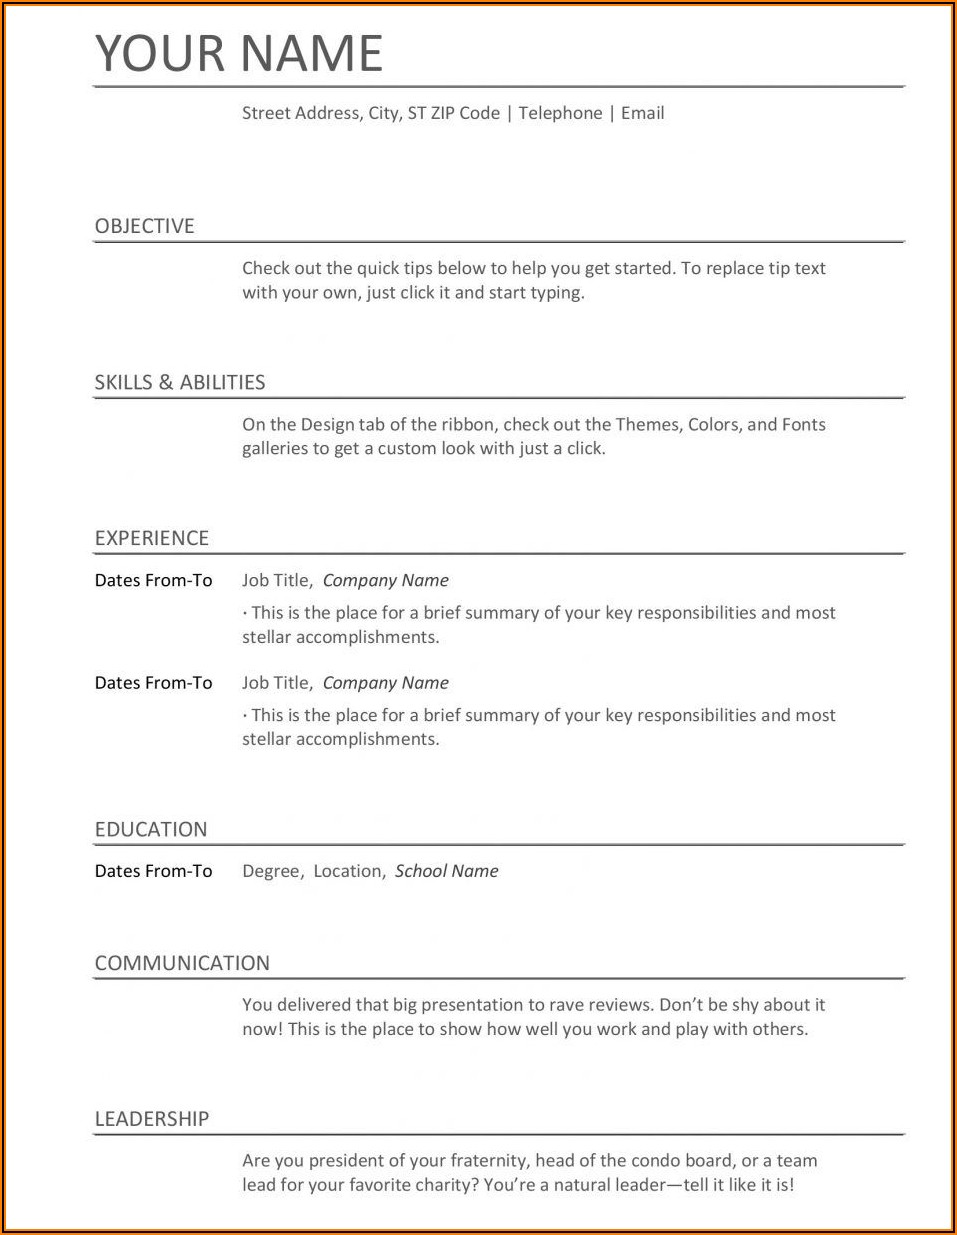 Word Templates For Resumes